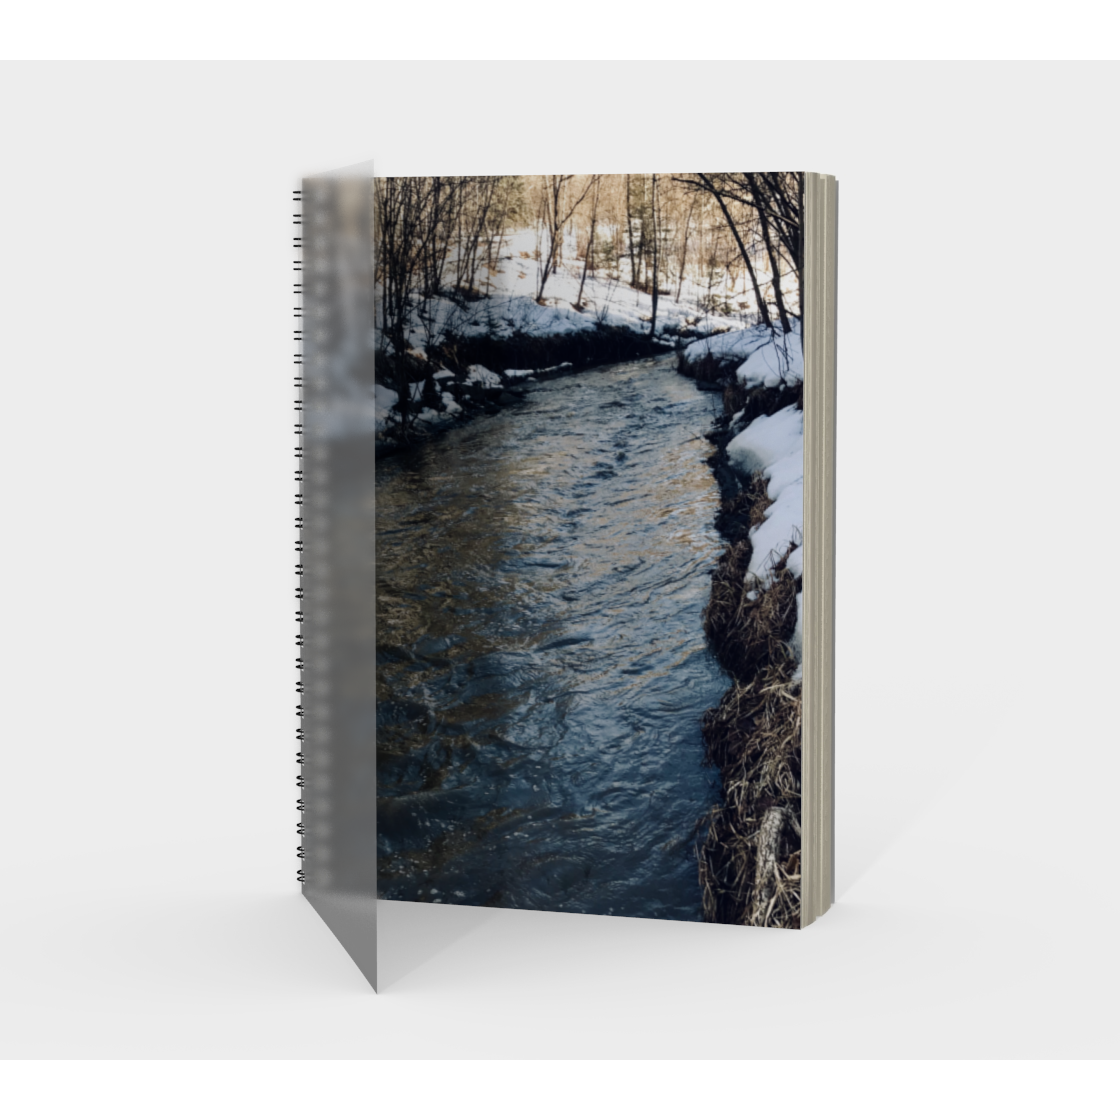 Notebook, Spiral-Bound, Custom Designed with our River Running Picture, Front